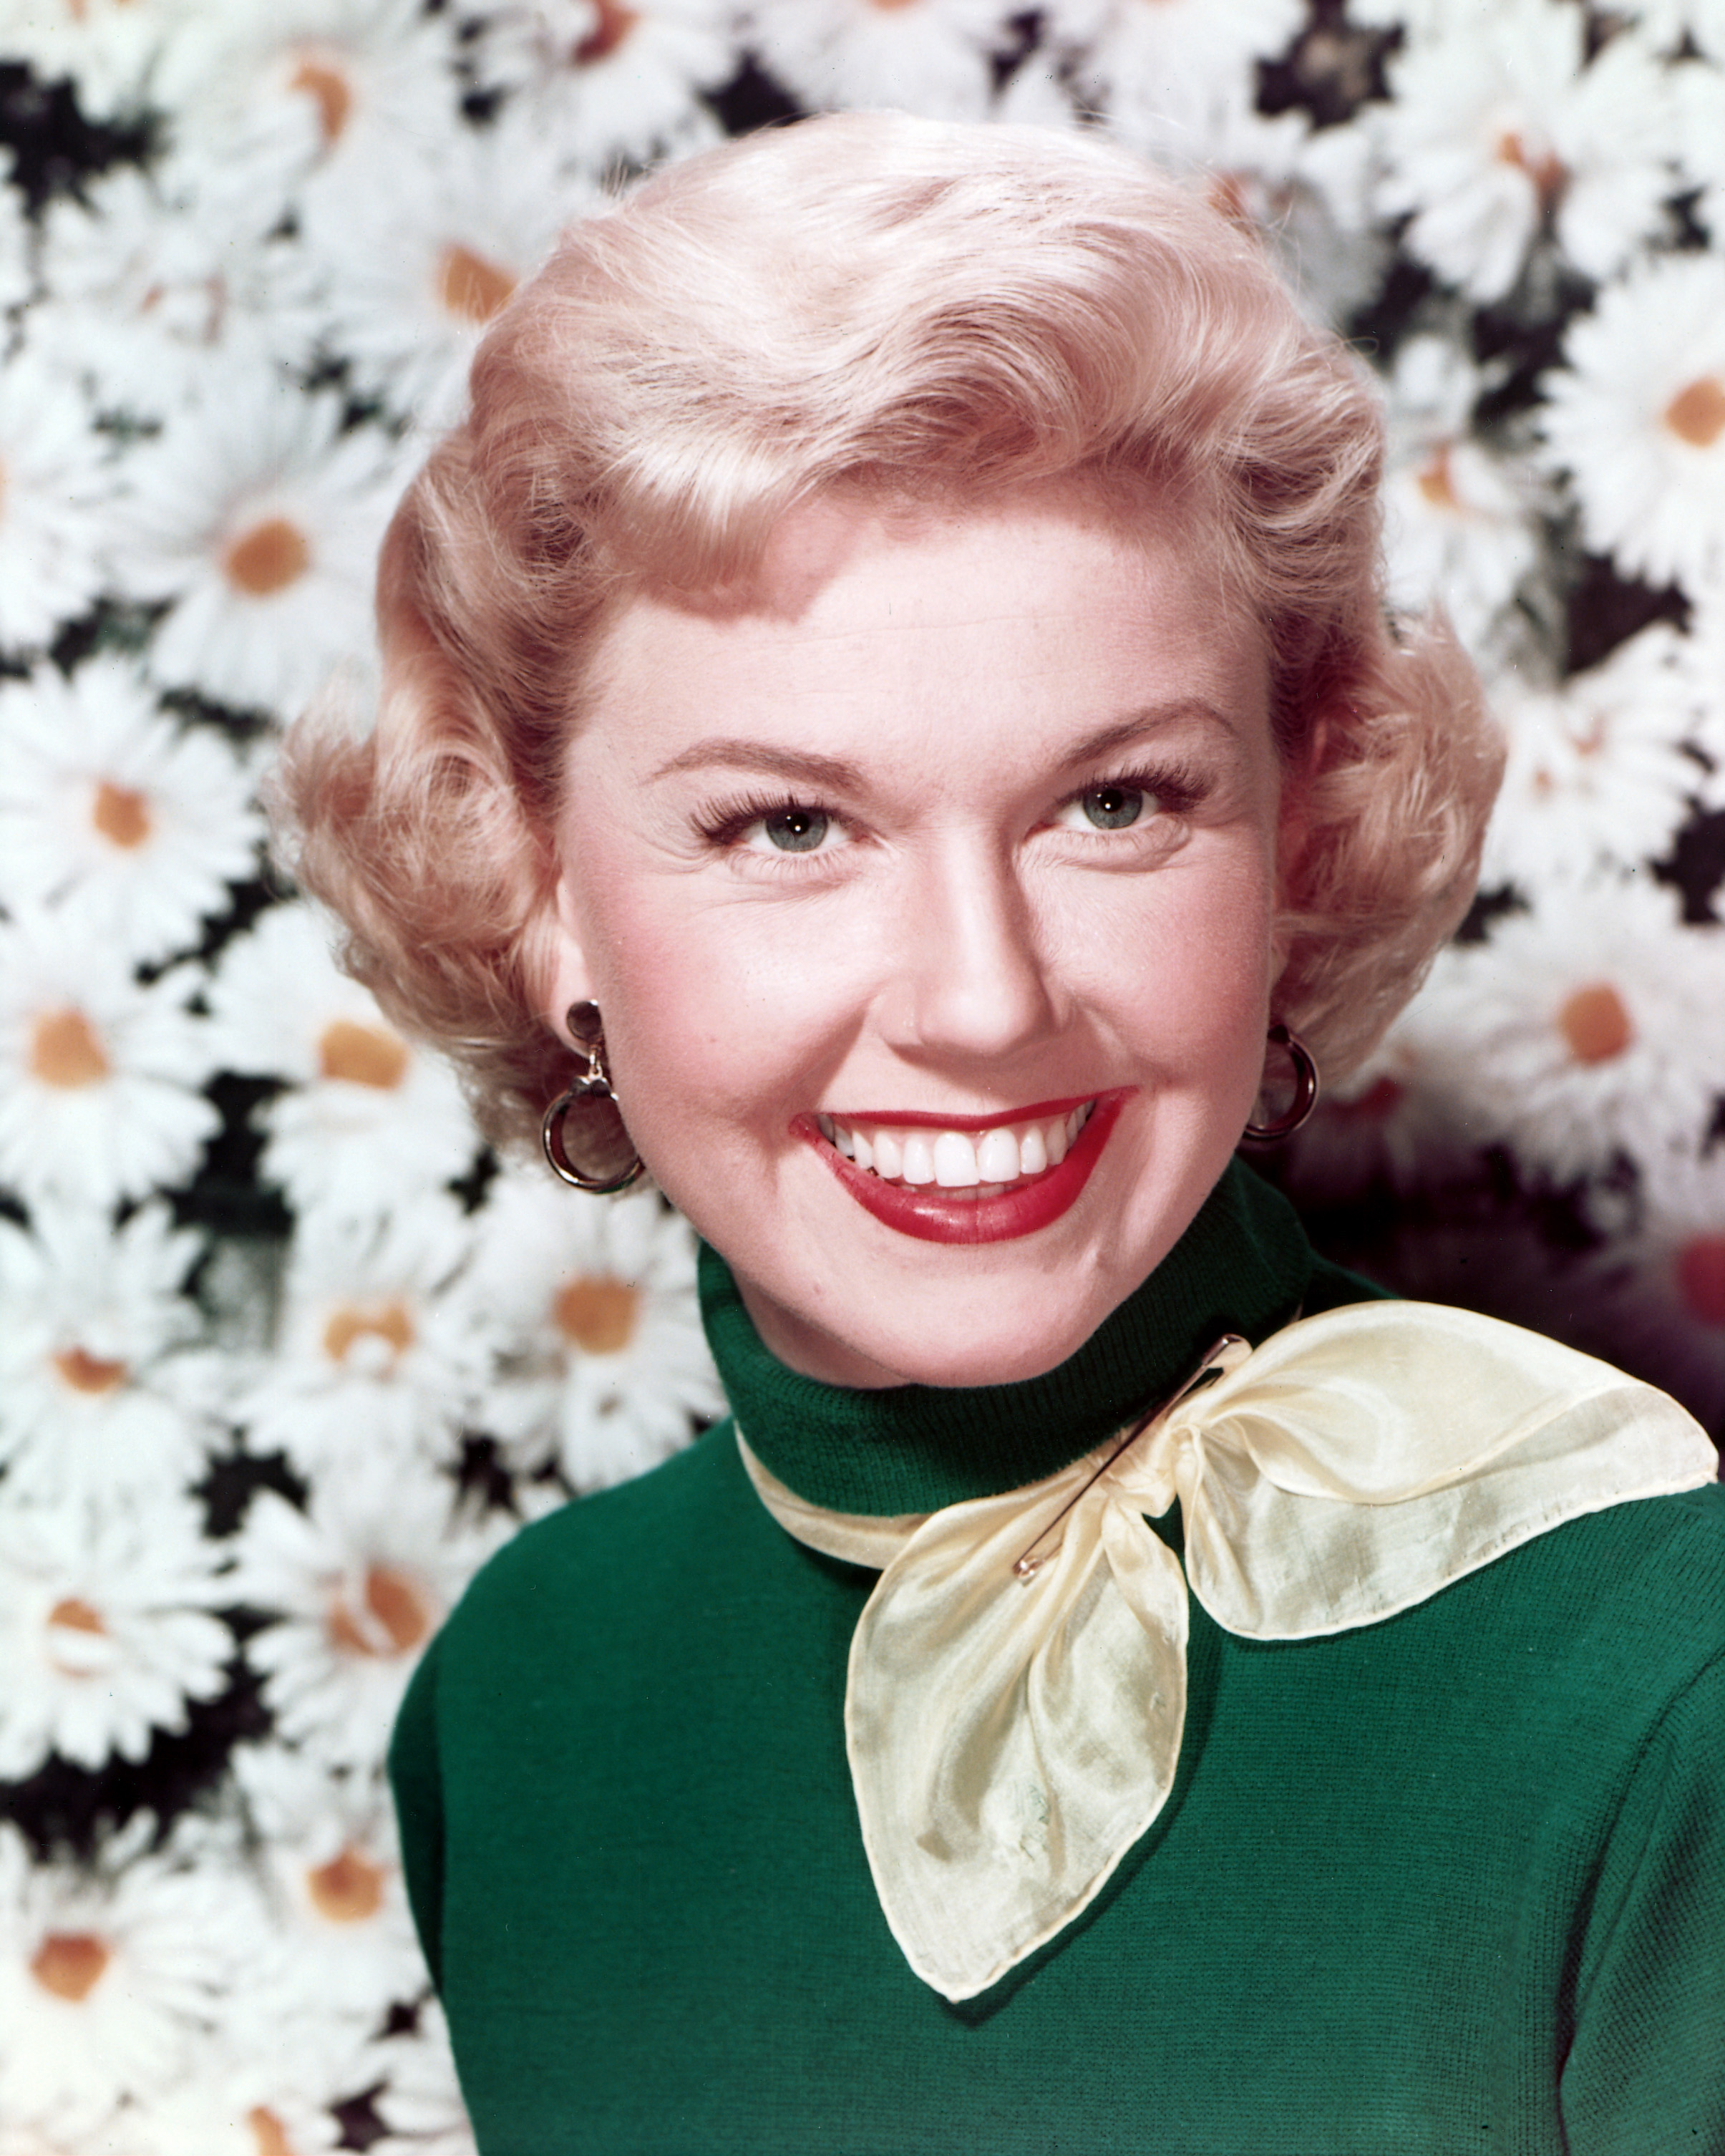 Actress Doris Day pictured smiling in a green sweater on January 1, 1960 | Source: Getty Images